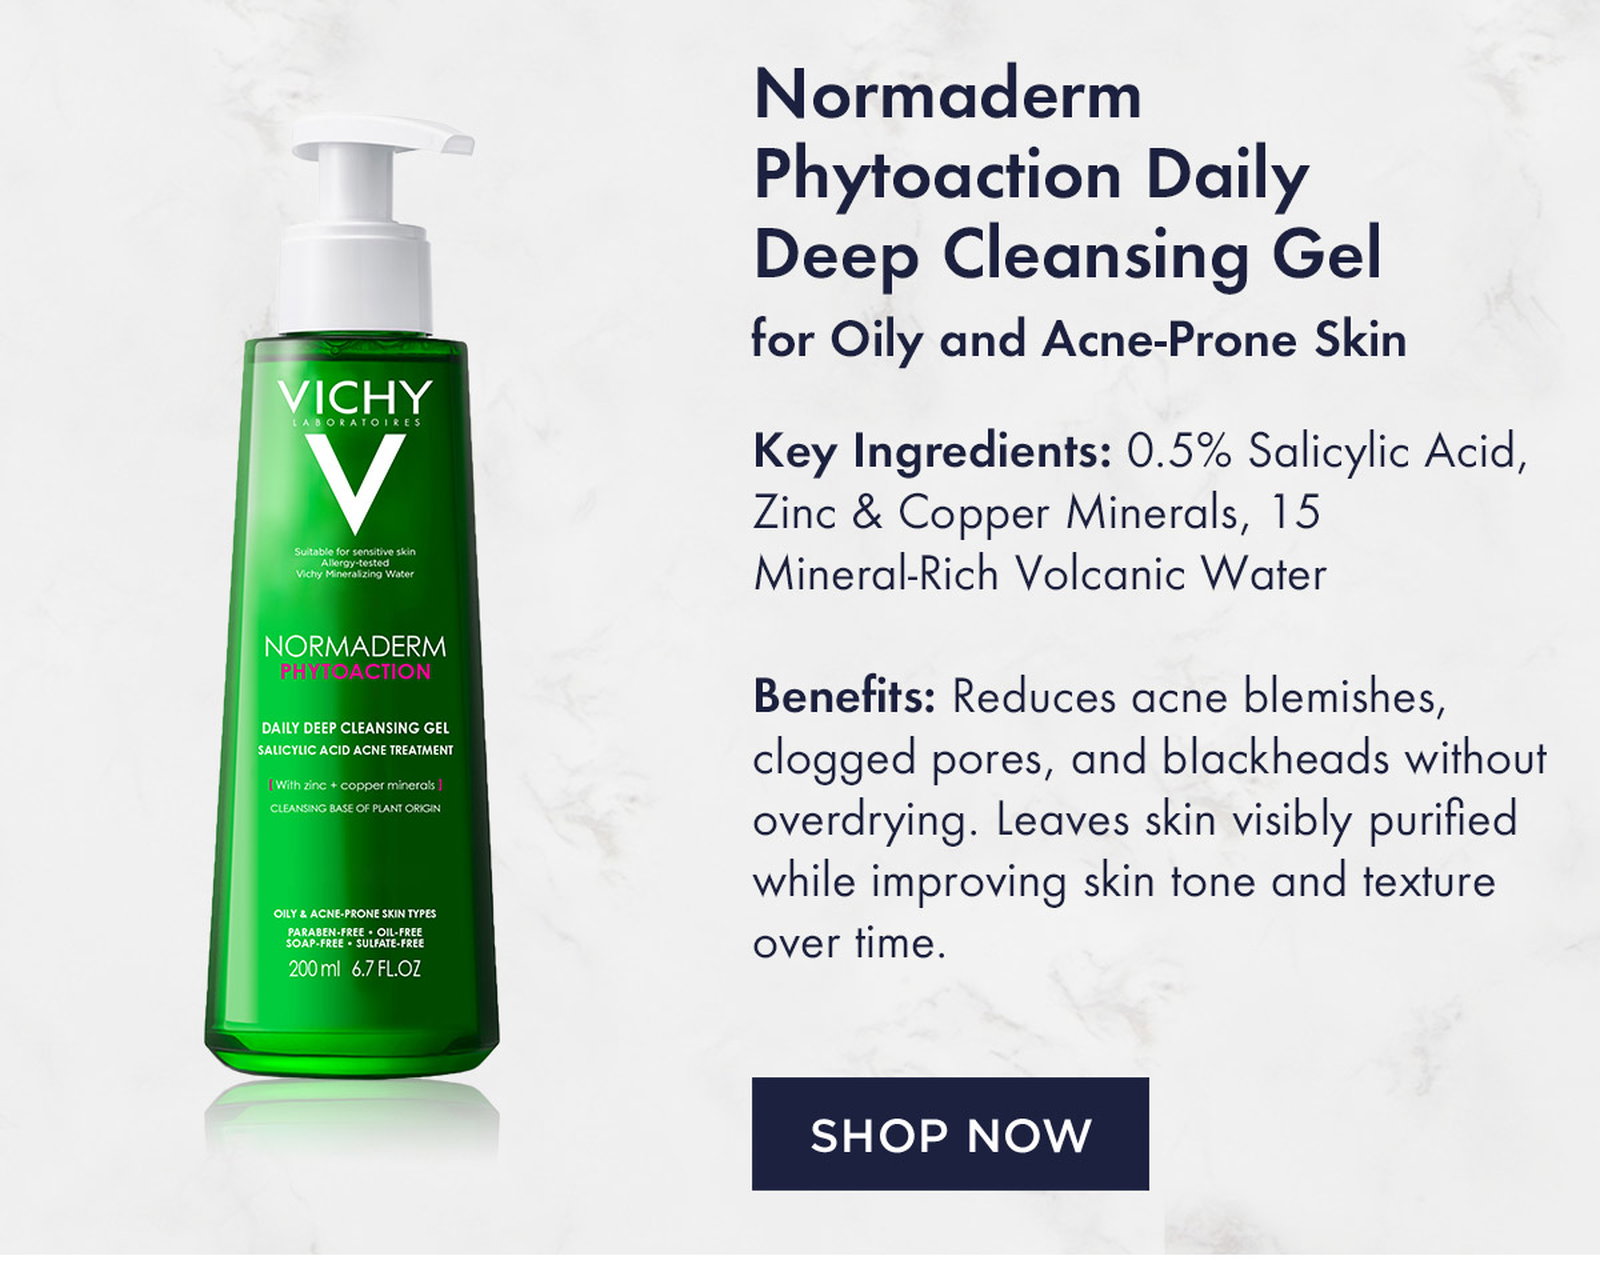 Vichy normaderm intensive purifying gel